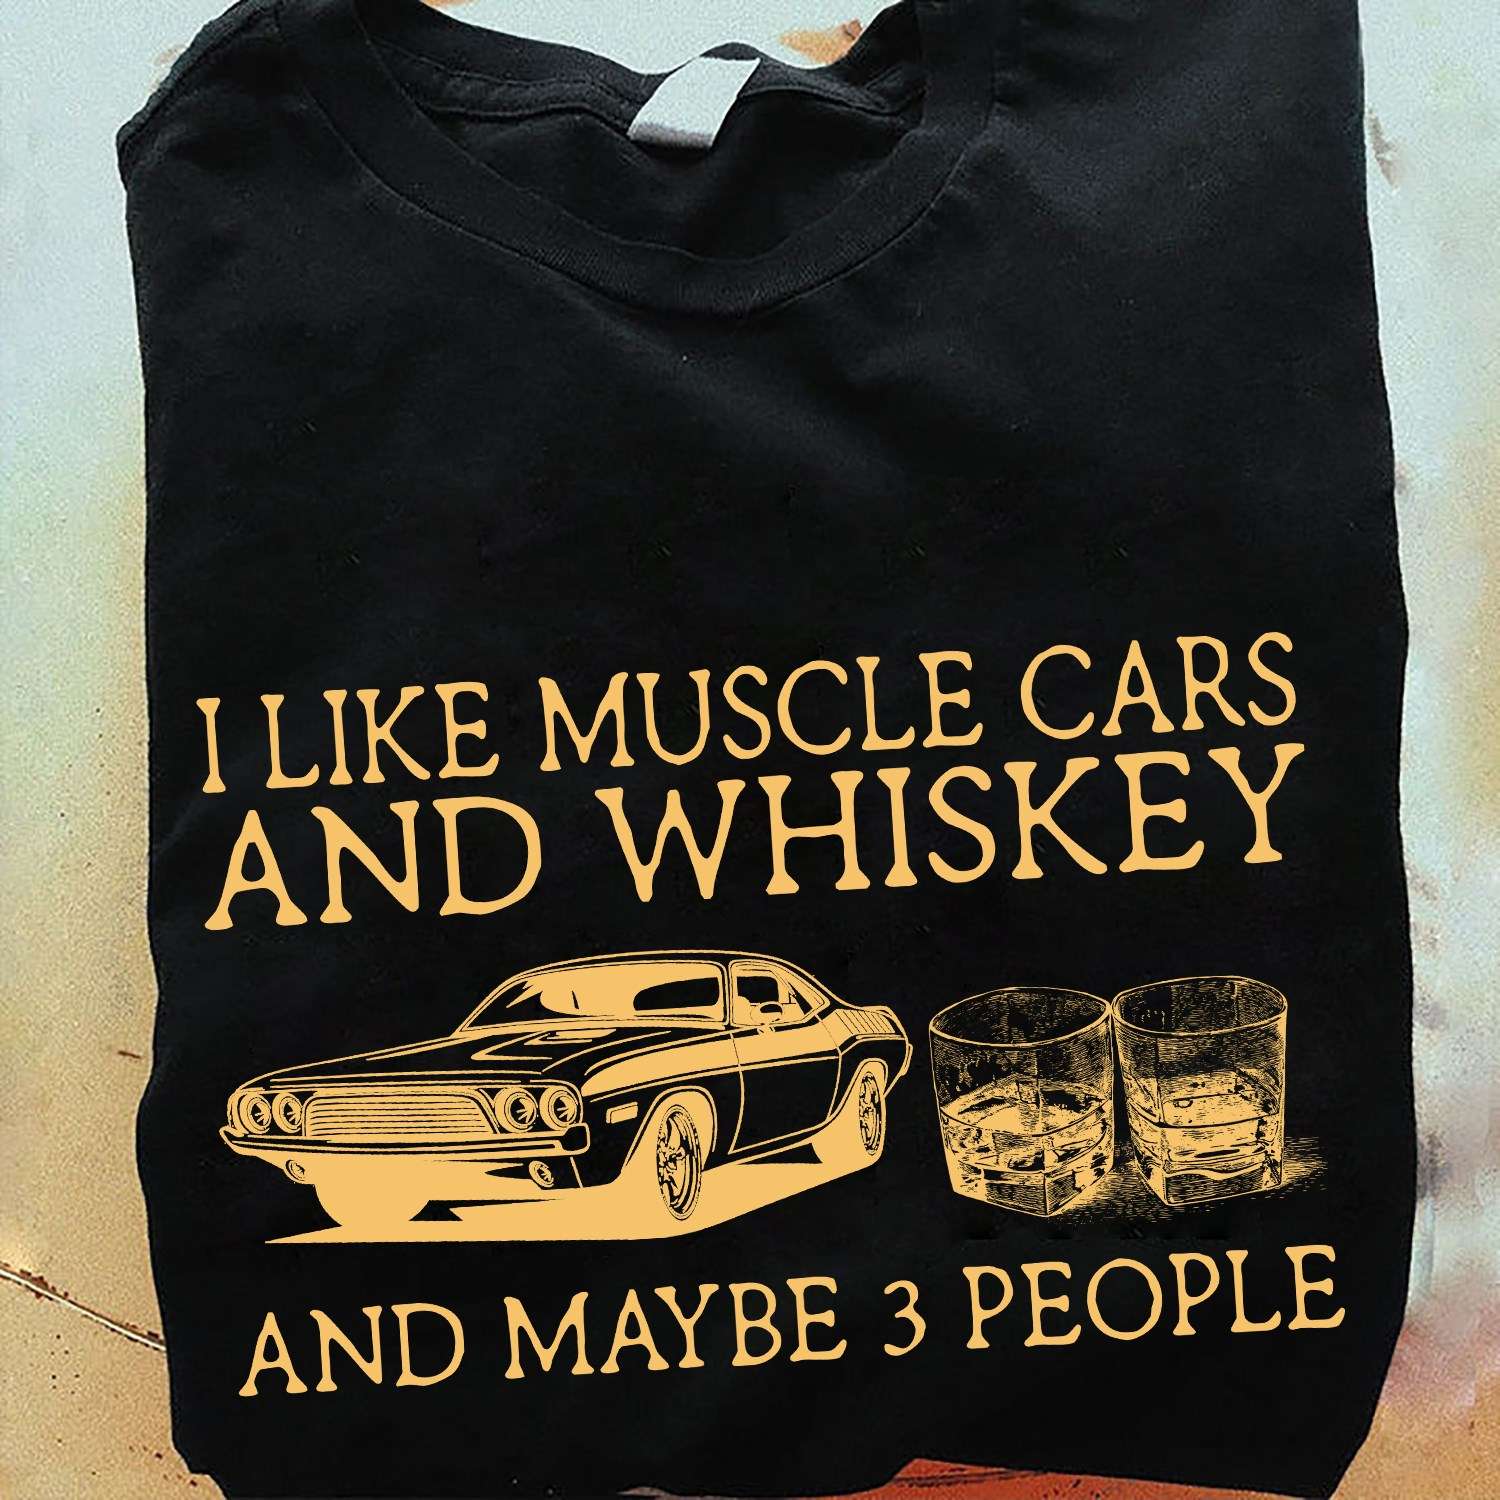 I like muscle cars and whiskey and maybe 3 people - Whiskey wine